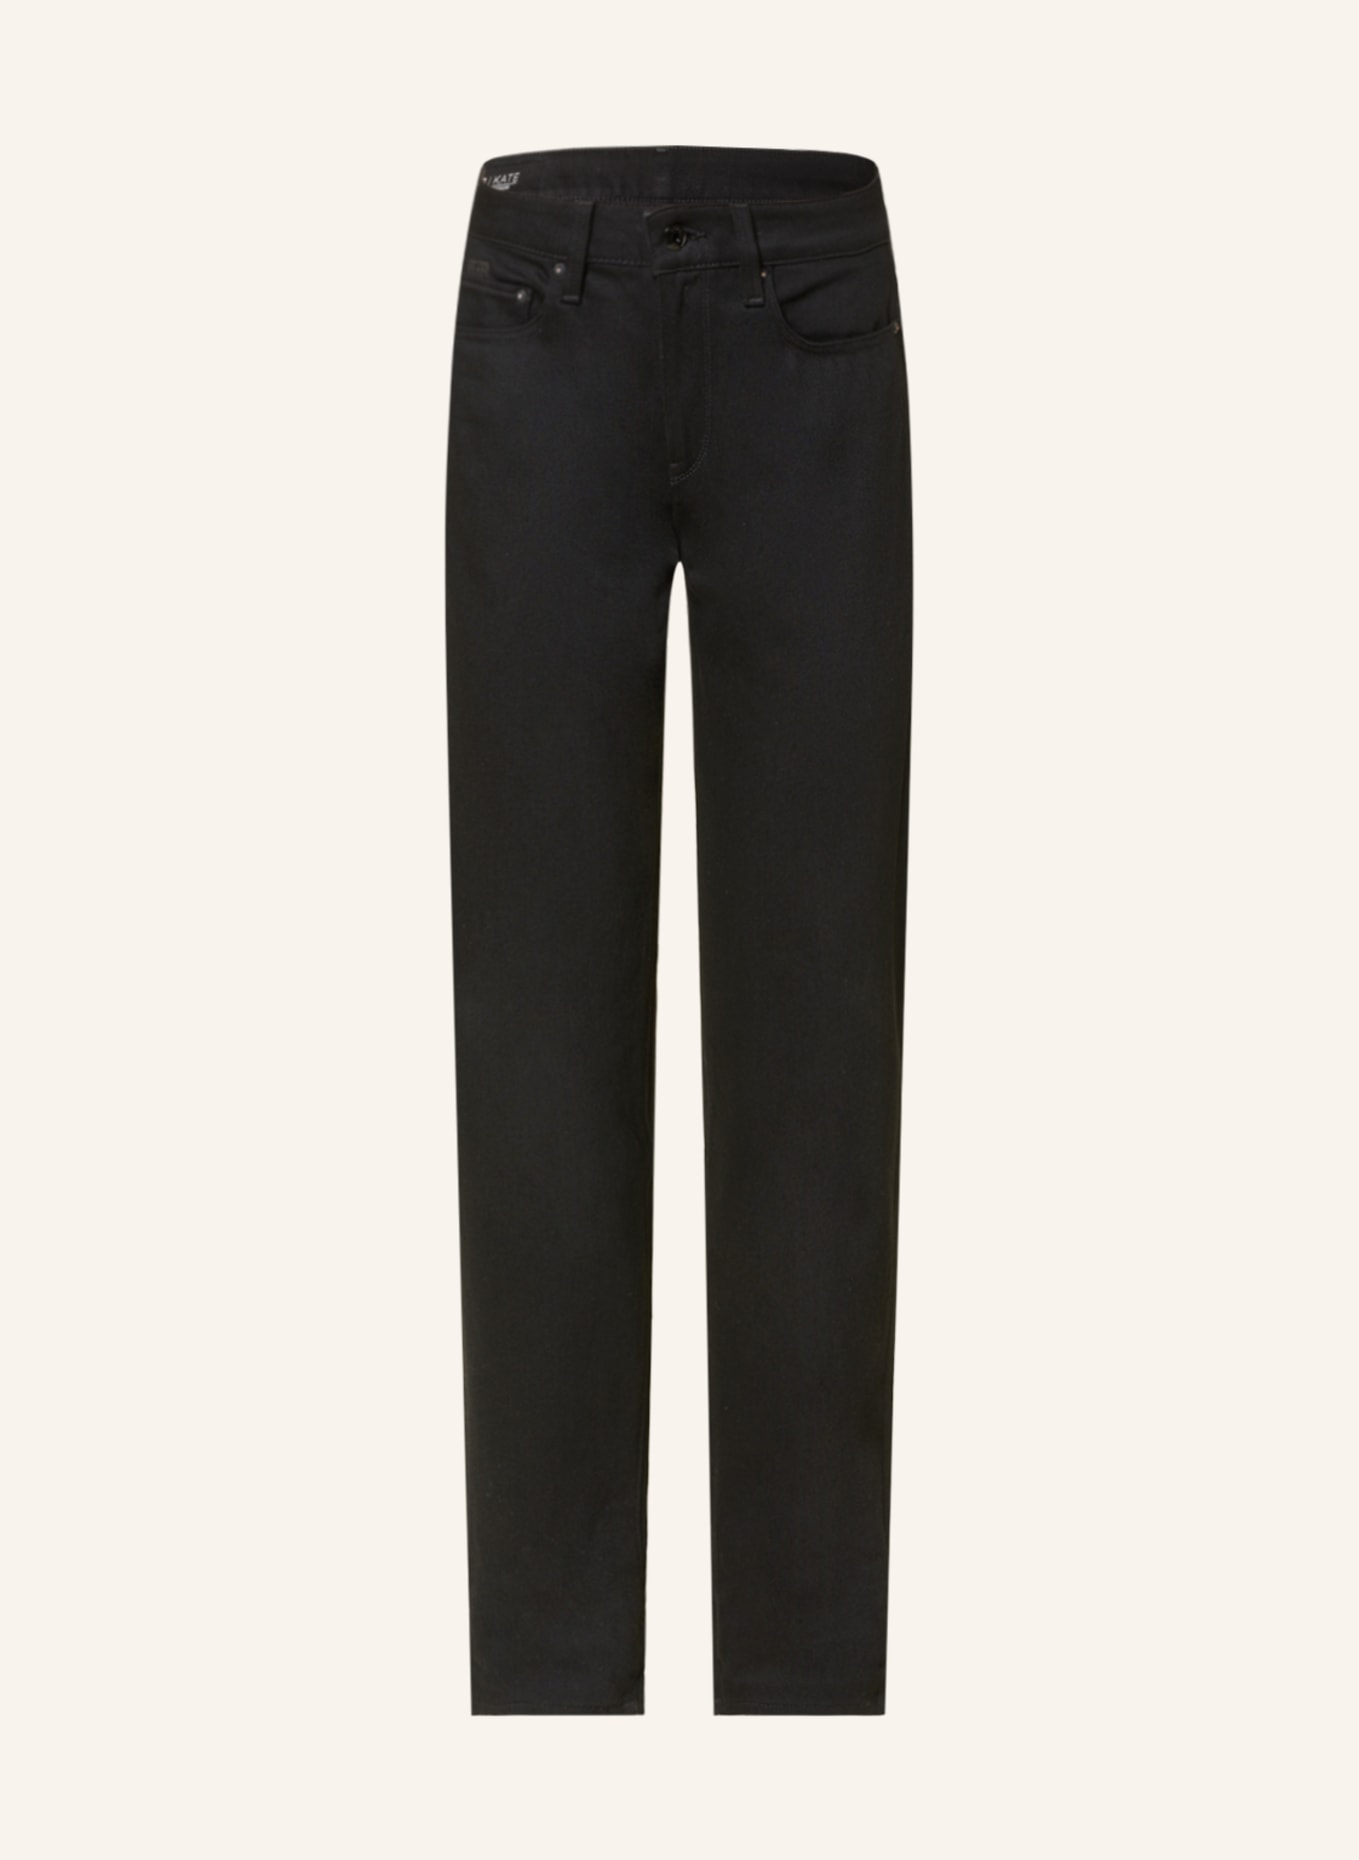 G-Star RAW Coated Jeans KATE , Farbe: A810 Pitch Black (Bild 1)